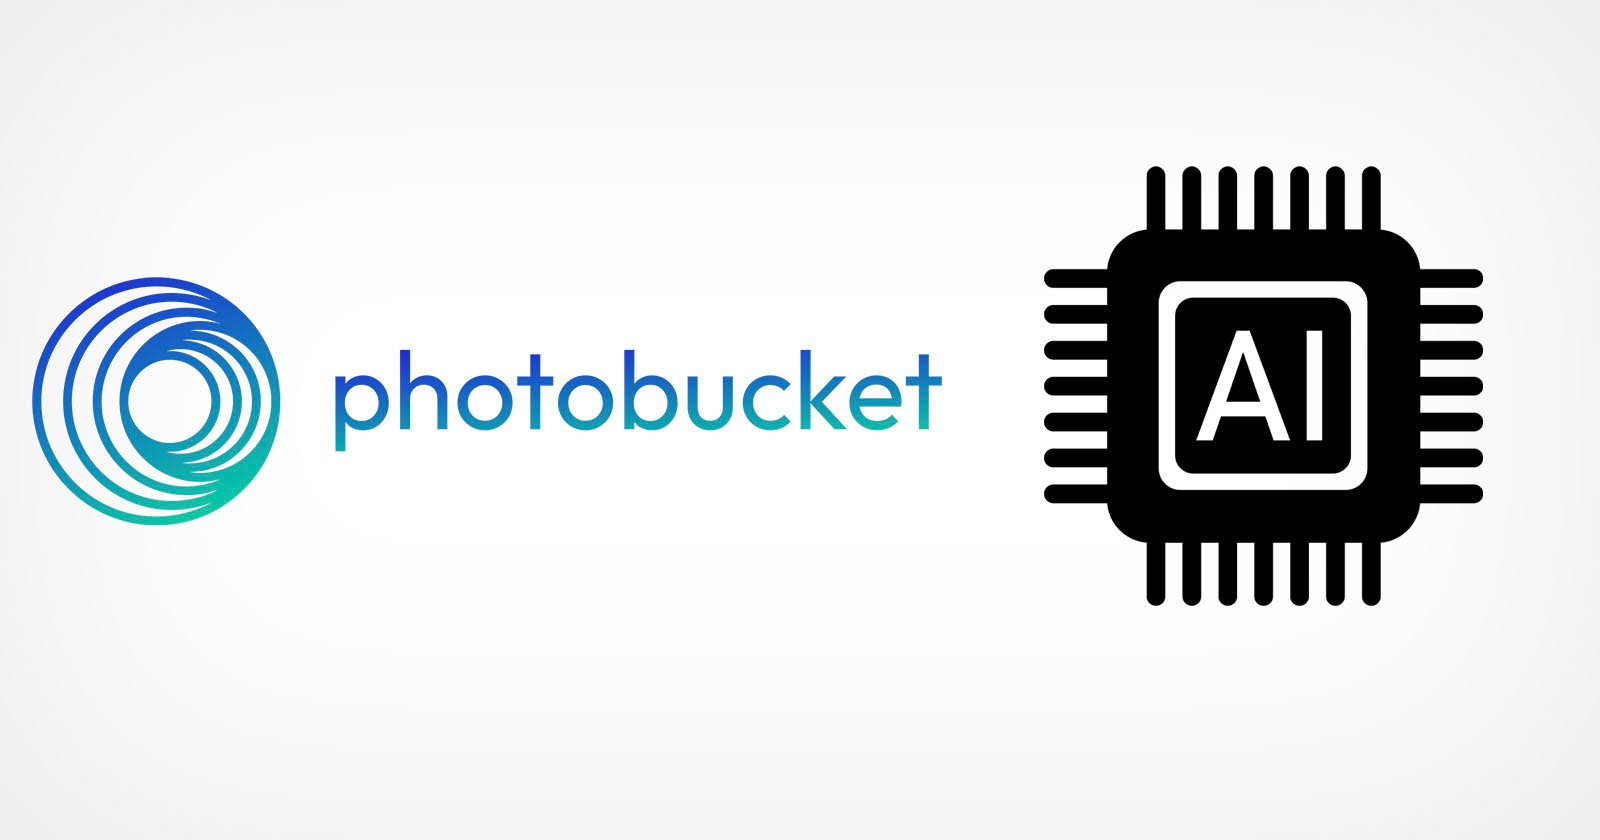 Photobucket is in Negotiations With AI Companies to Licence 13 Billion Images